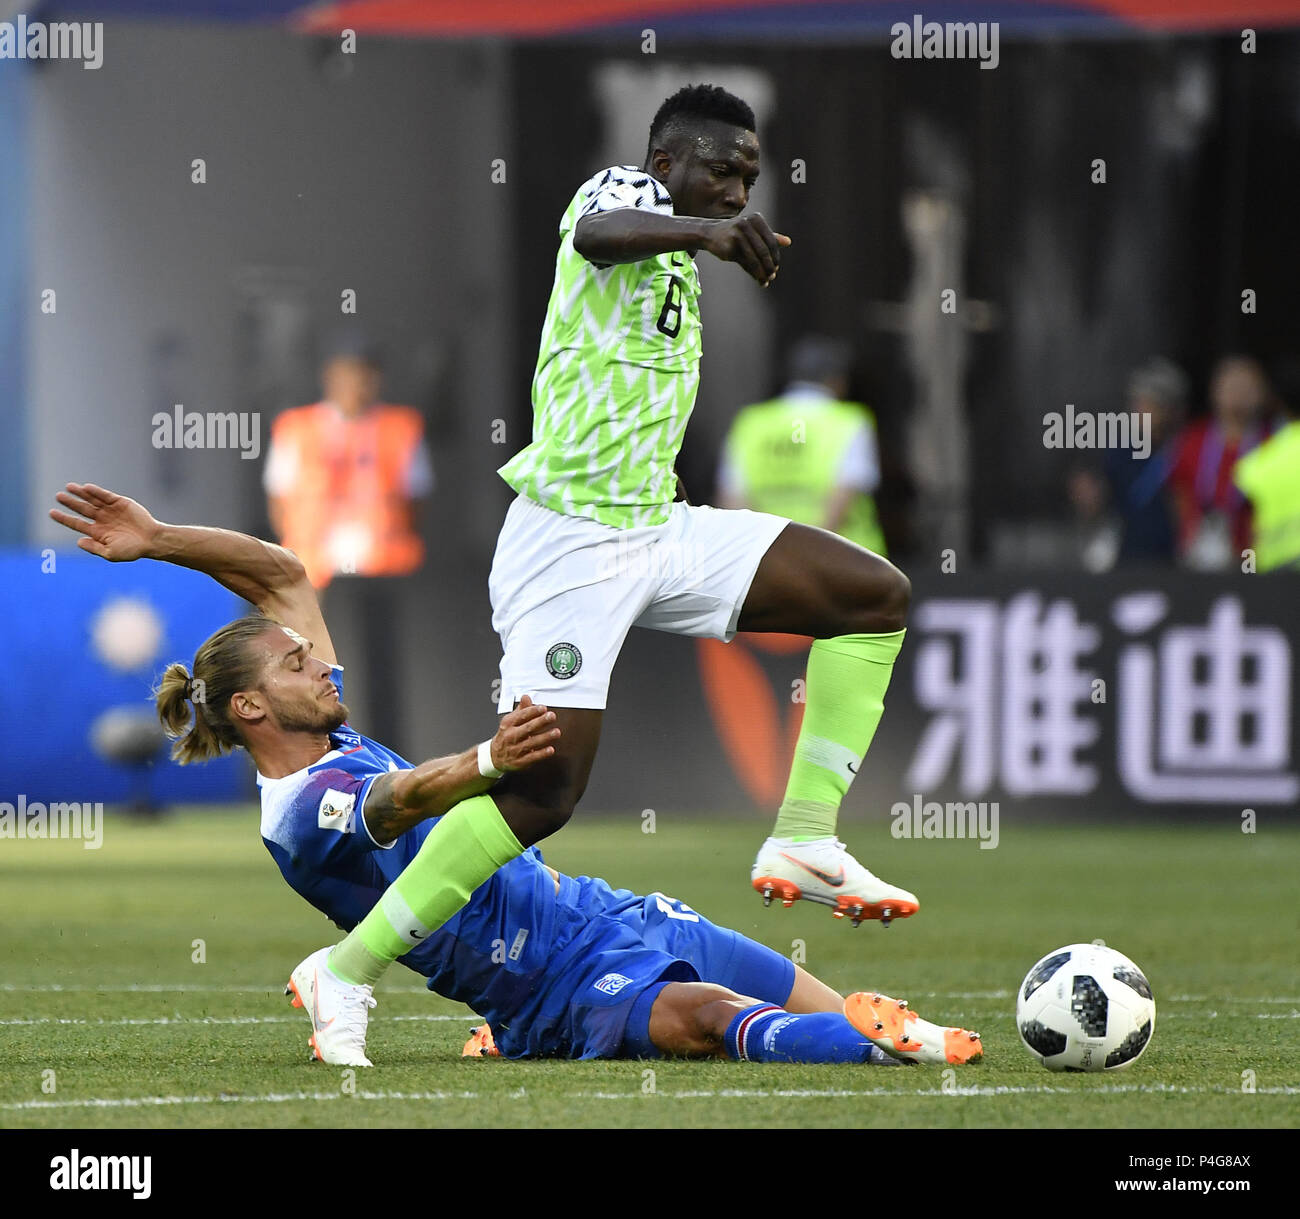 Volgograd, Russia. 22nd June, 2018. Oghenekaro Etebo (top) of Nigeria vies with Rurik Gislason of Iceland during the 2018 FIFA World Cup Group D match between Nigeria and Iceland in Volgograd, Russia, June 22, 2018. Credit: He Canling/Xinhua/Alamy Live News Stock Photo